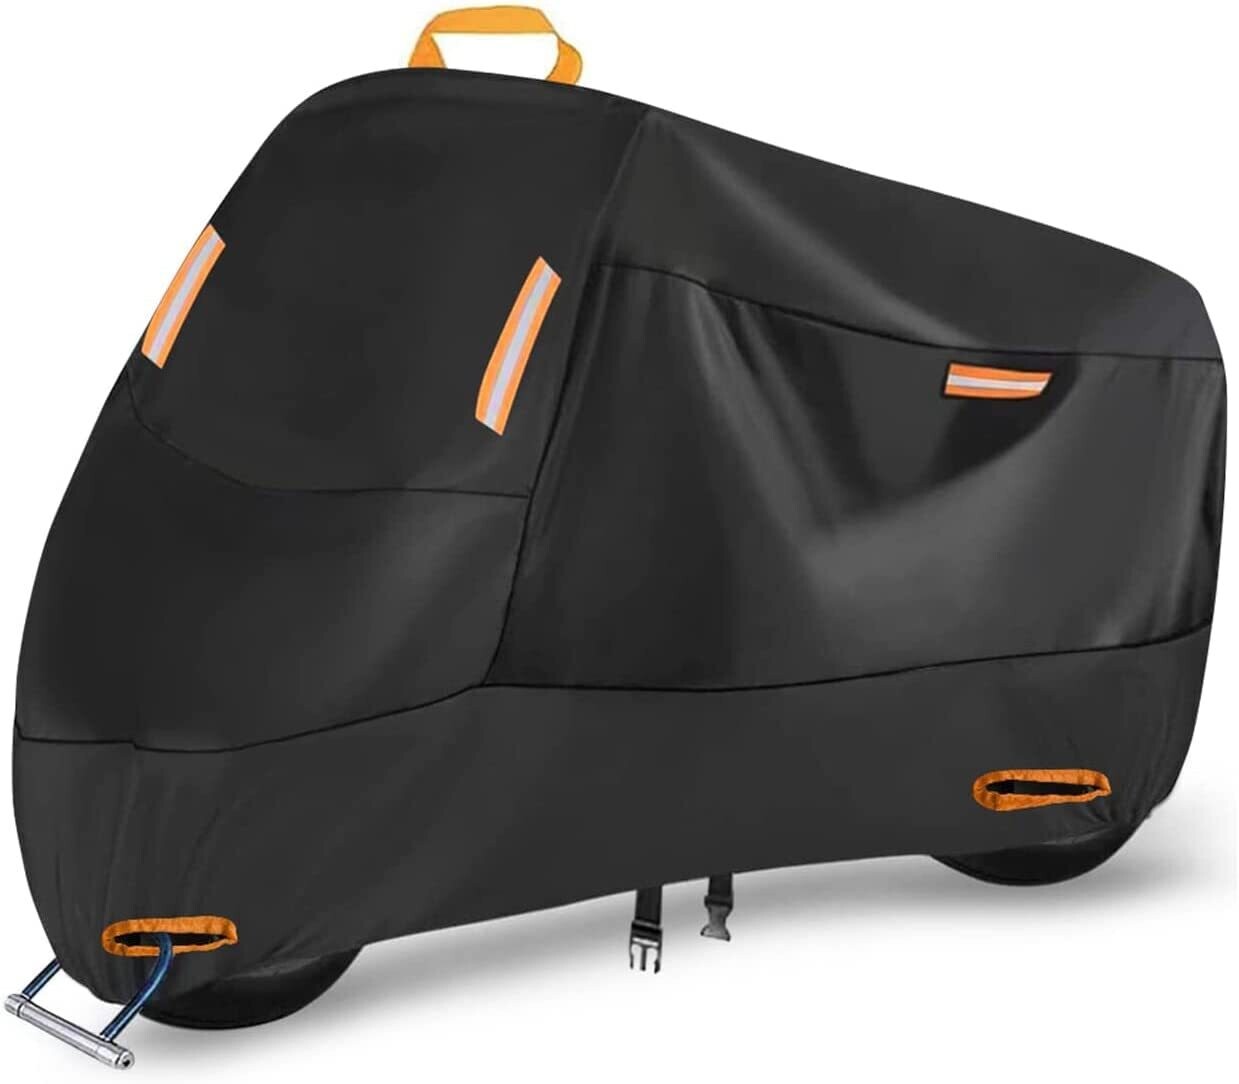 Outdoor Protection Motorcycle Cover with Lock Holes in 300D Waterproof,